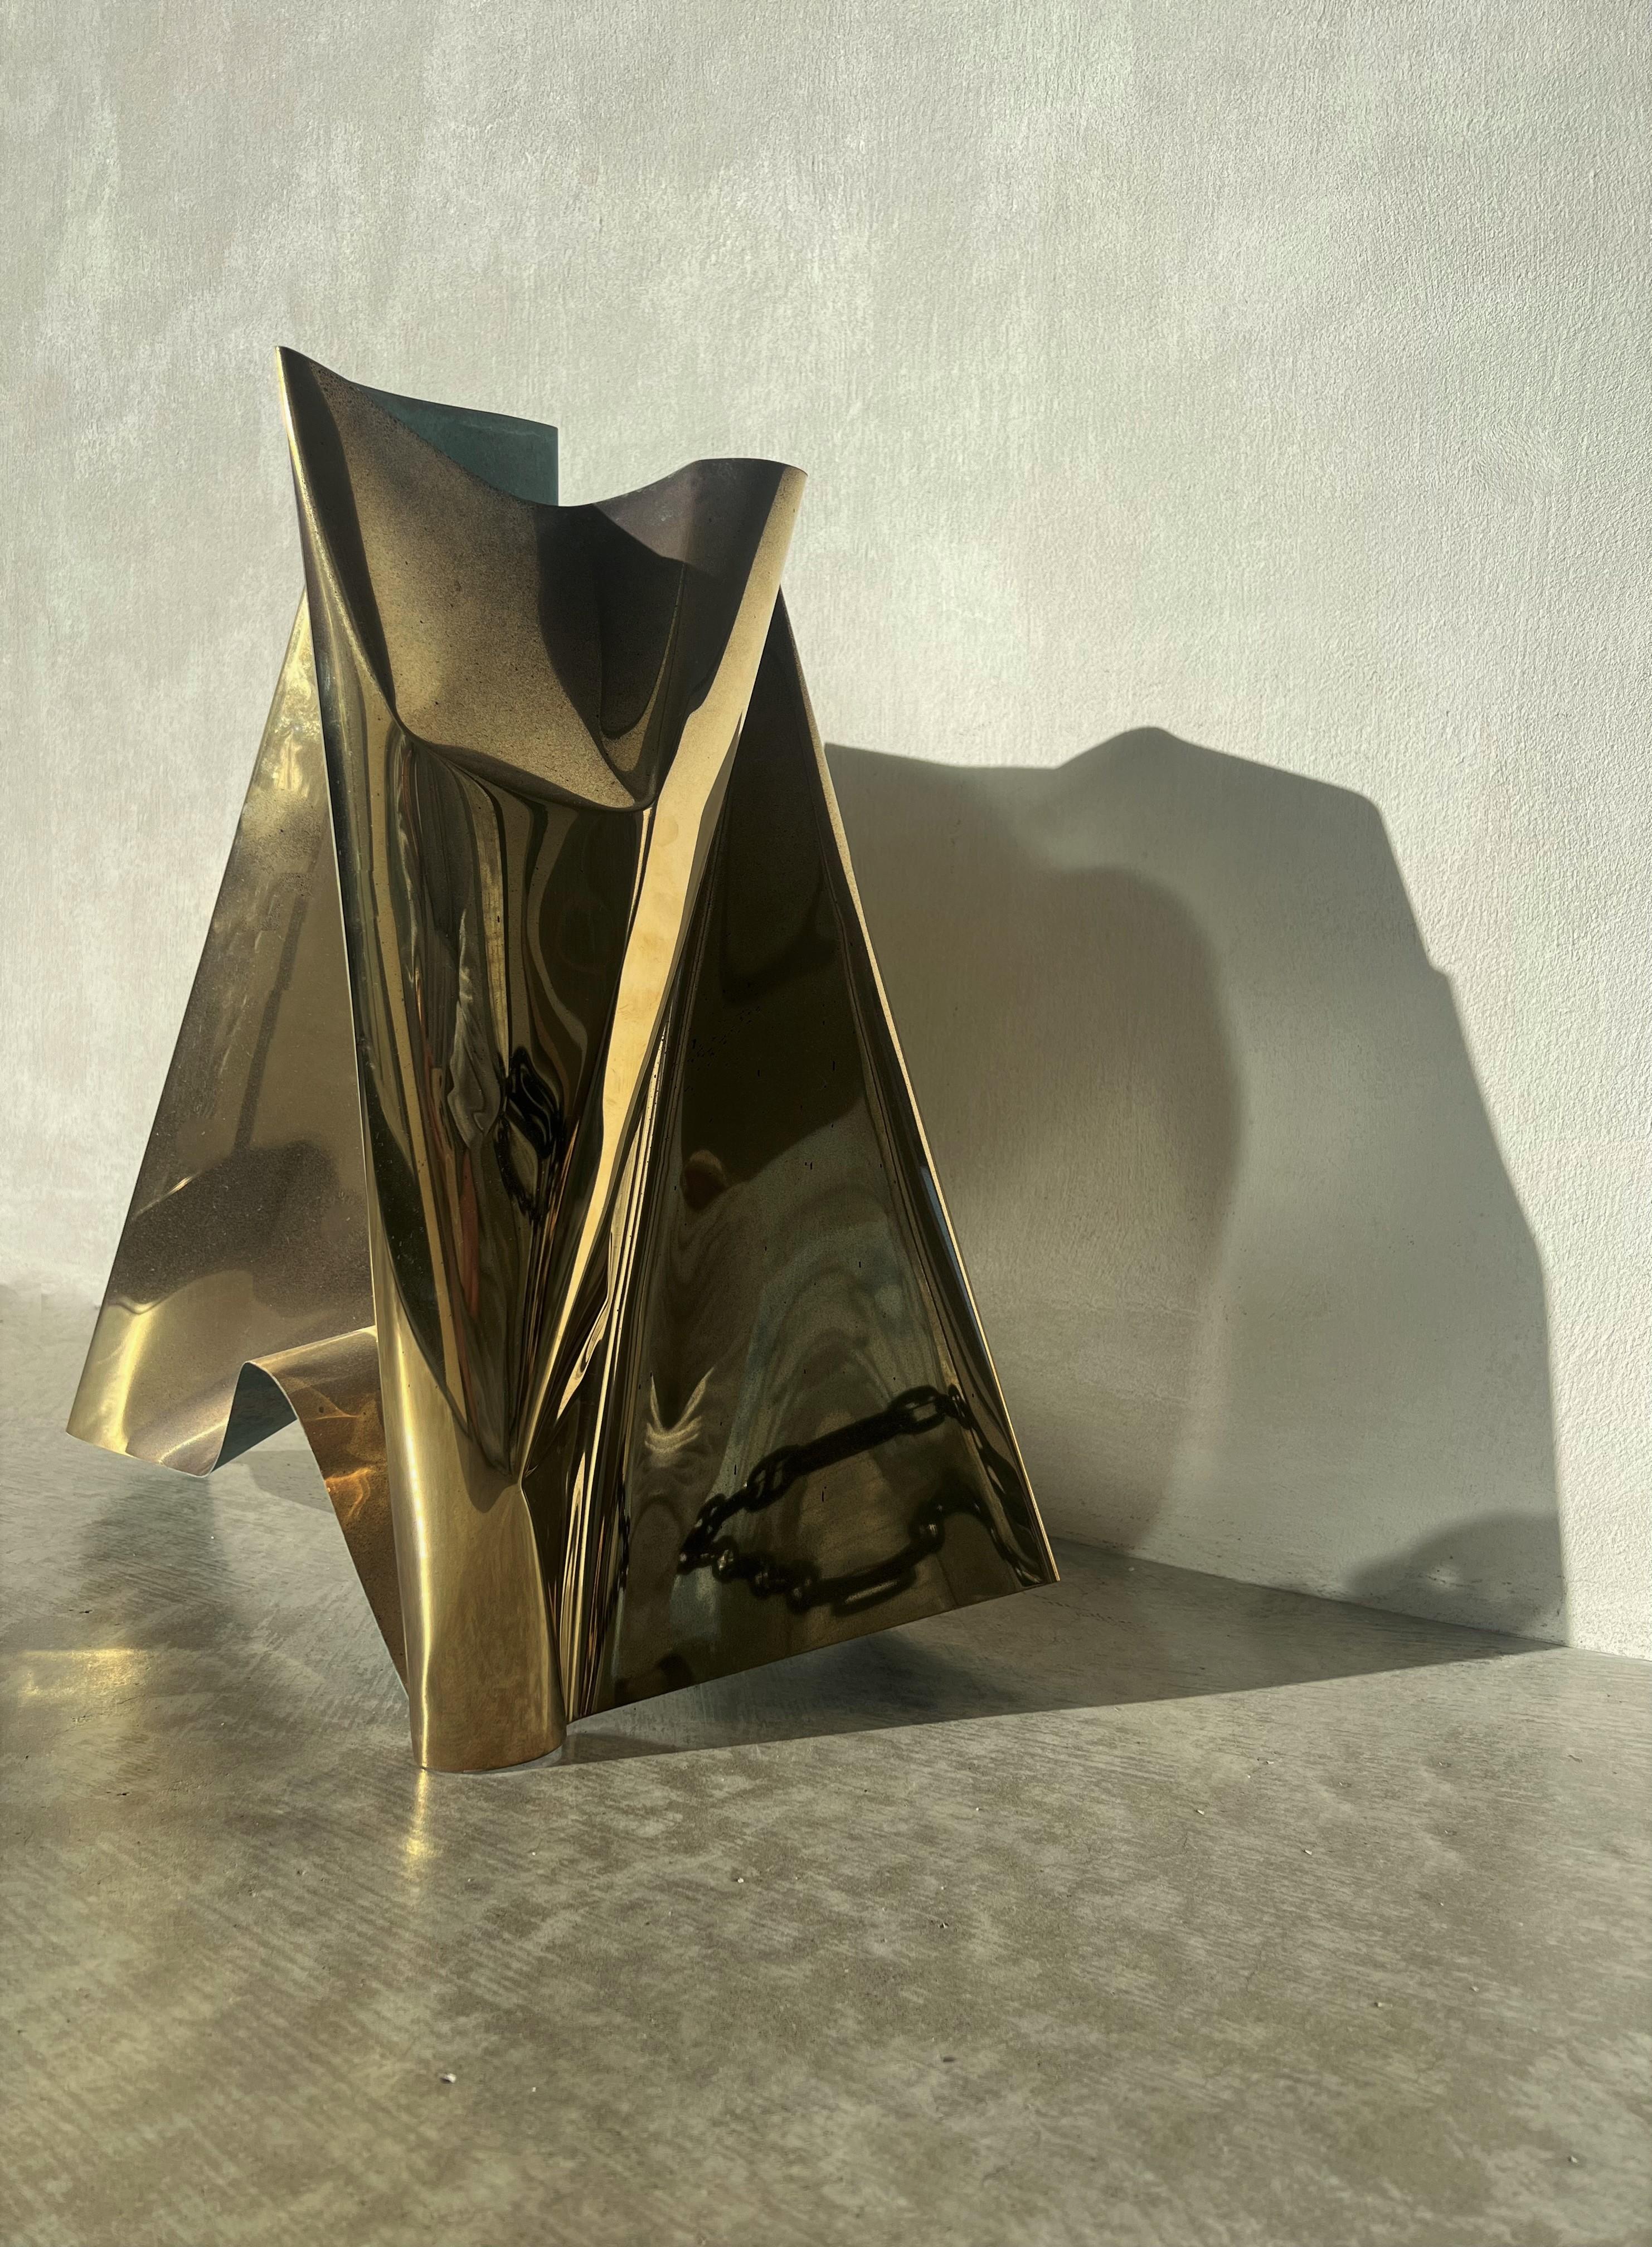 Shape Shifter II 2023 by Jodi Newnham. Bright folded brass with aged patina on the exterior and green patina underside. Sculptural metal wall art by New Zealand artist Jodi Newnham. Owner, collector and designer at midcentury Swag, Swag Design